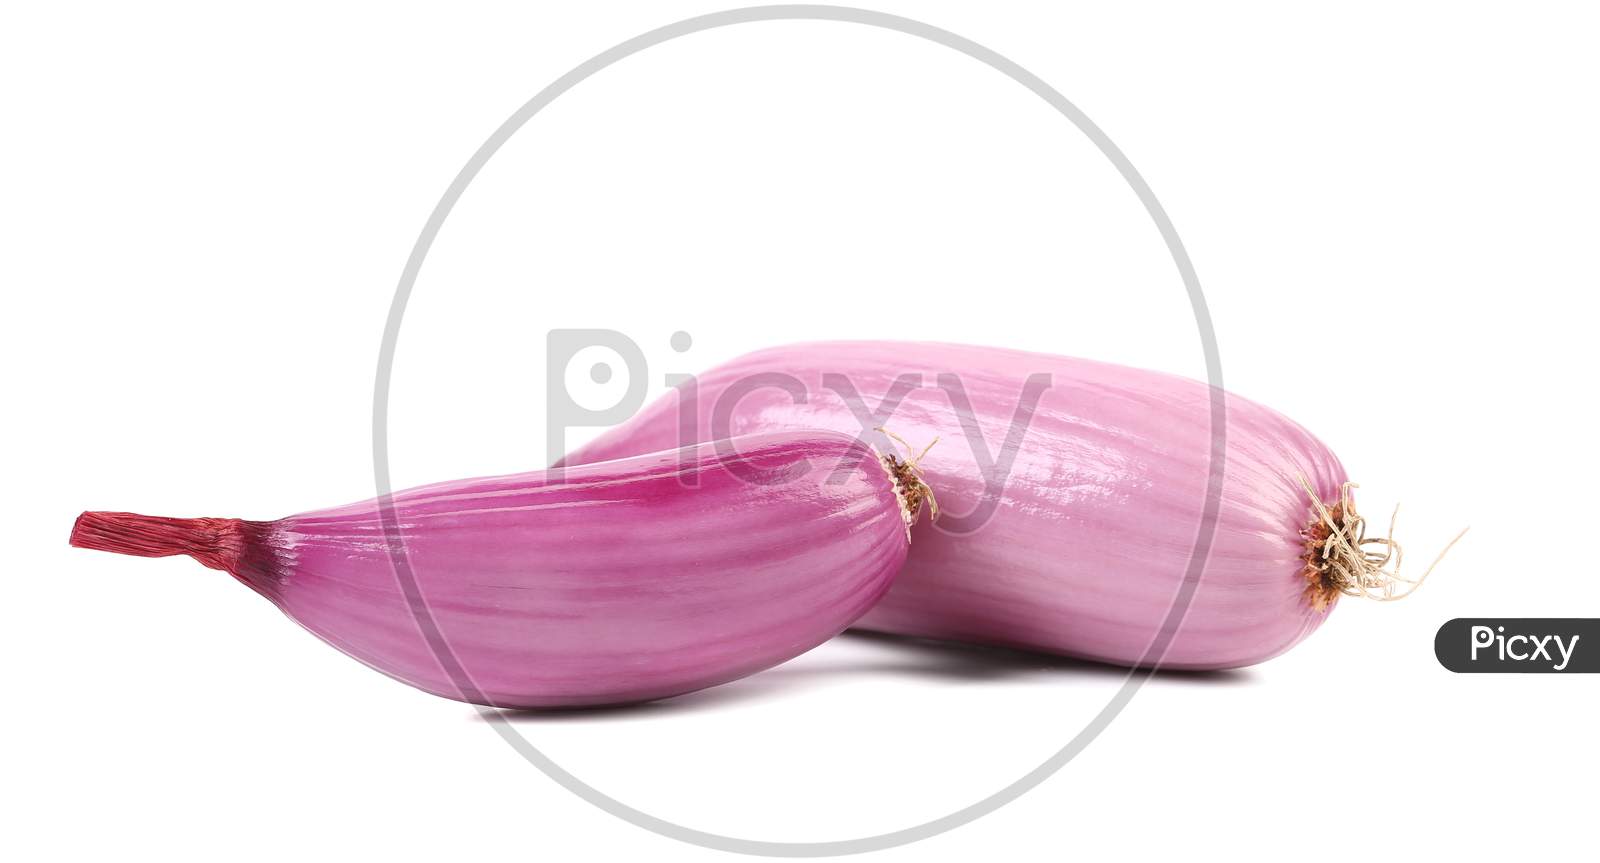 Red Onion Bulbs. Isolated On A White Background.